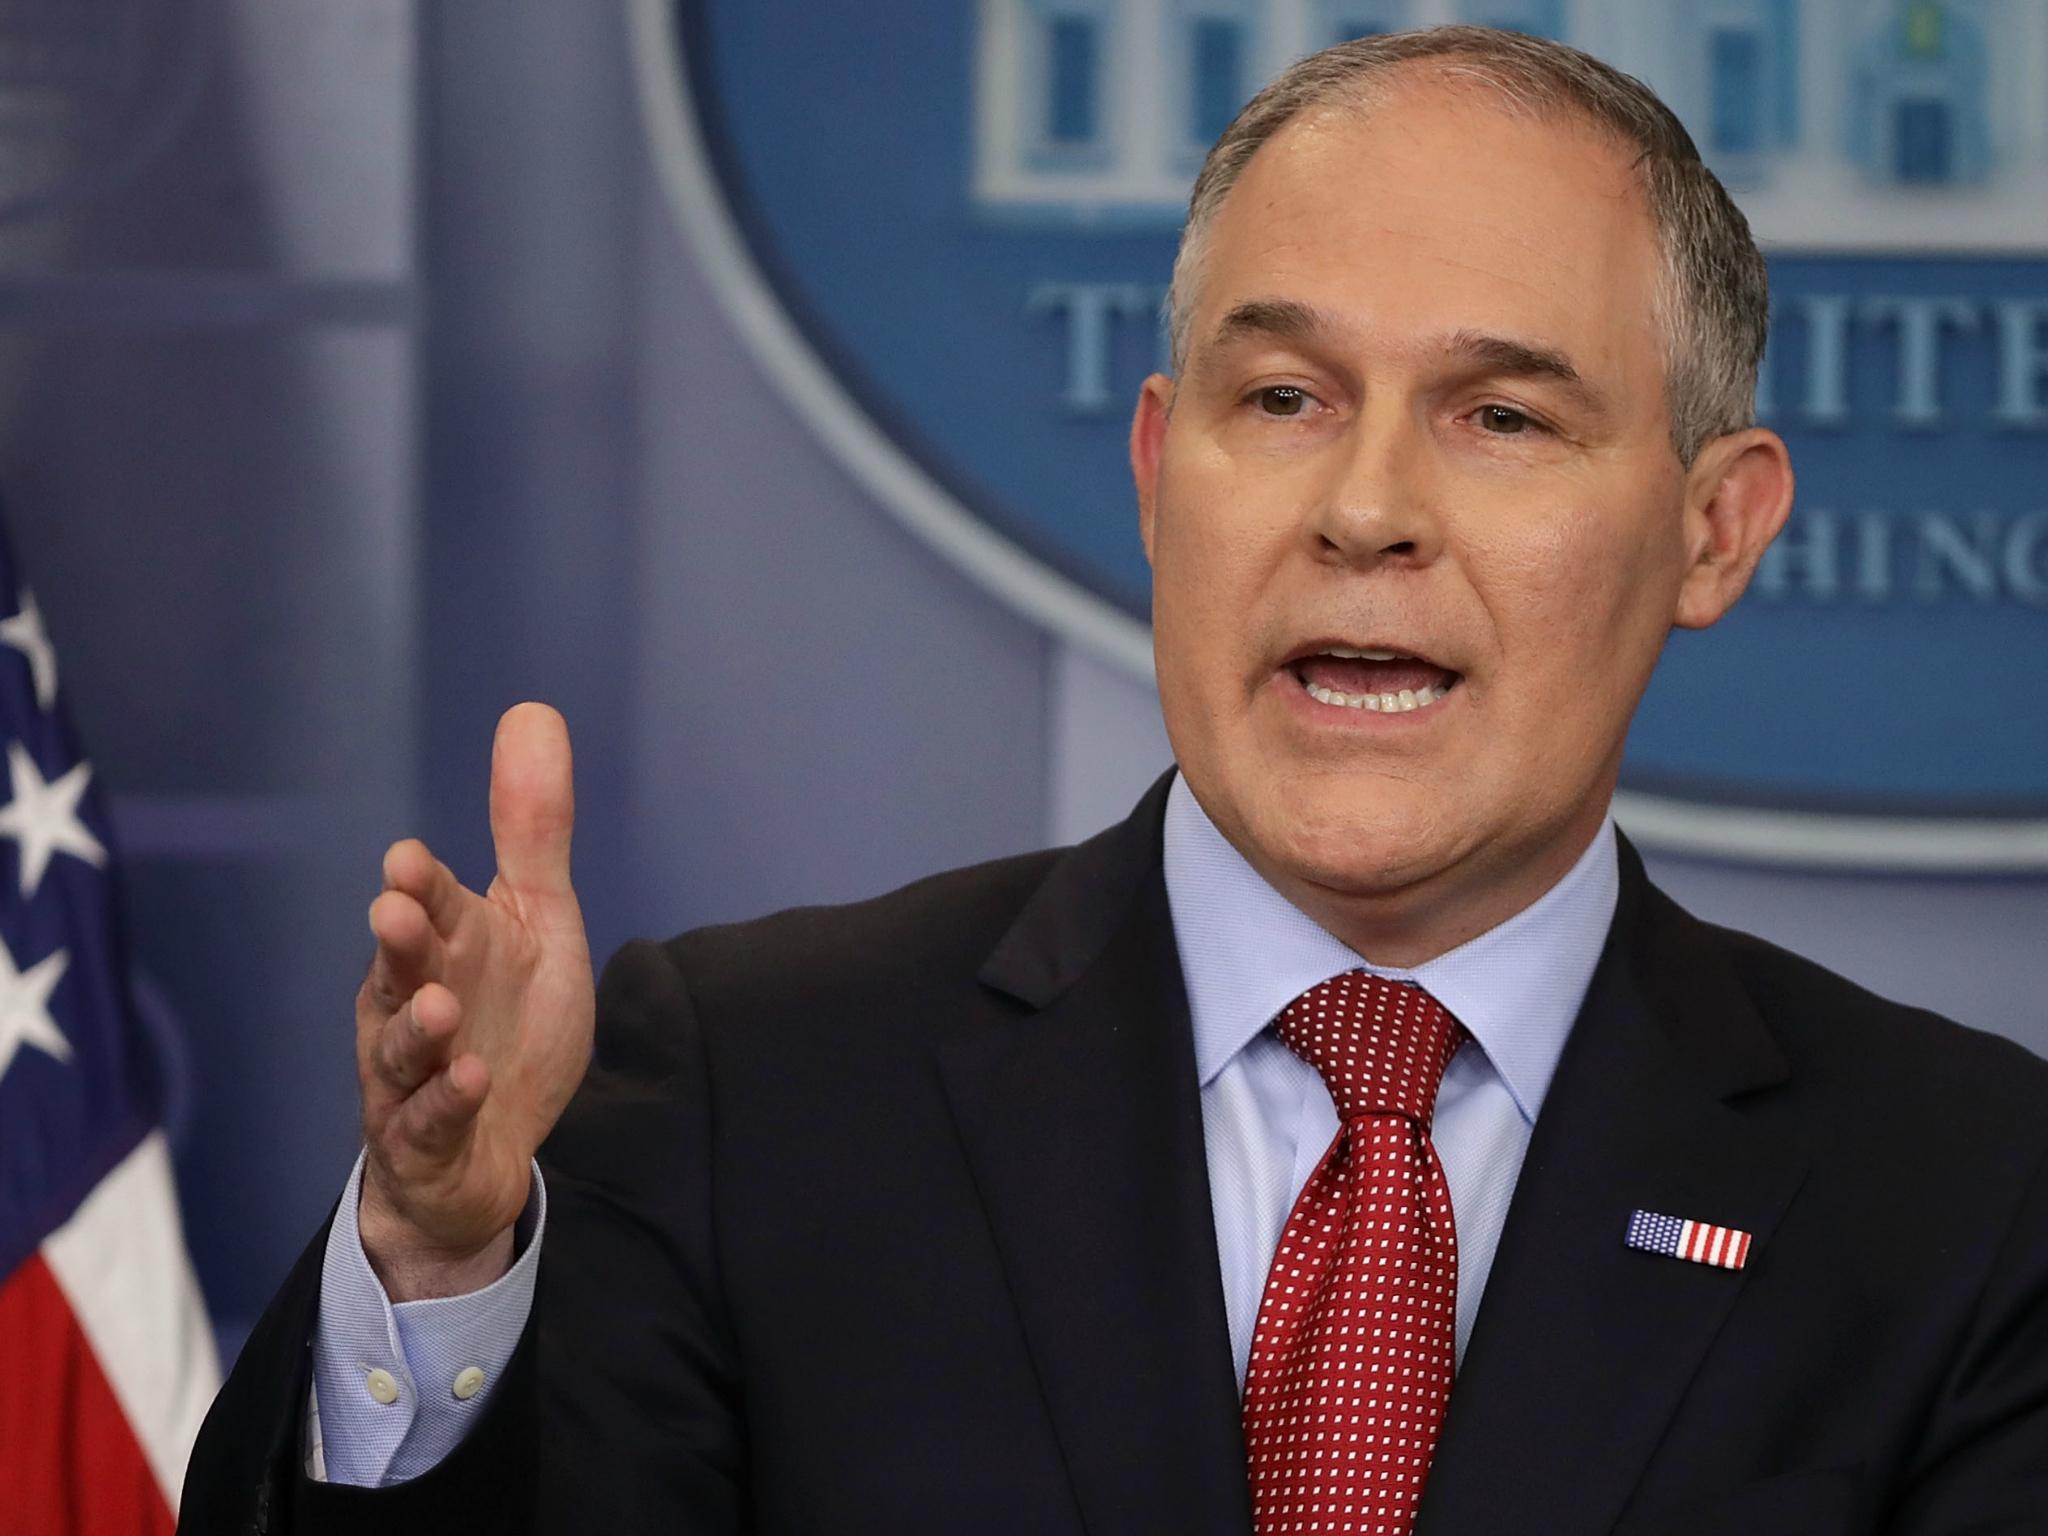 Scott Pruitt is a climate-change denier and head of the US Environmental Protection Agency